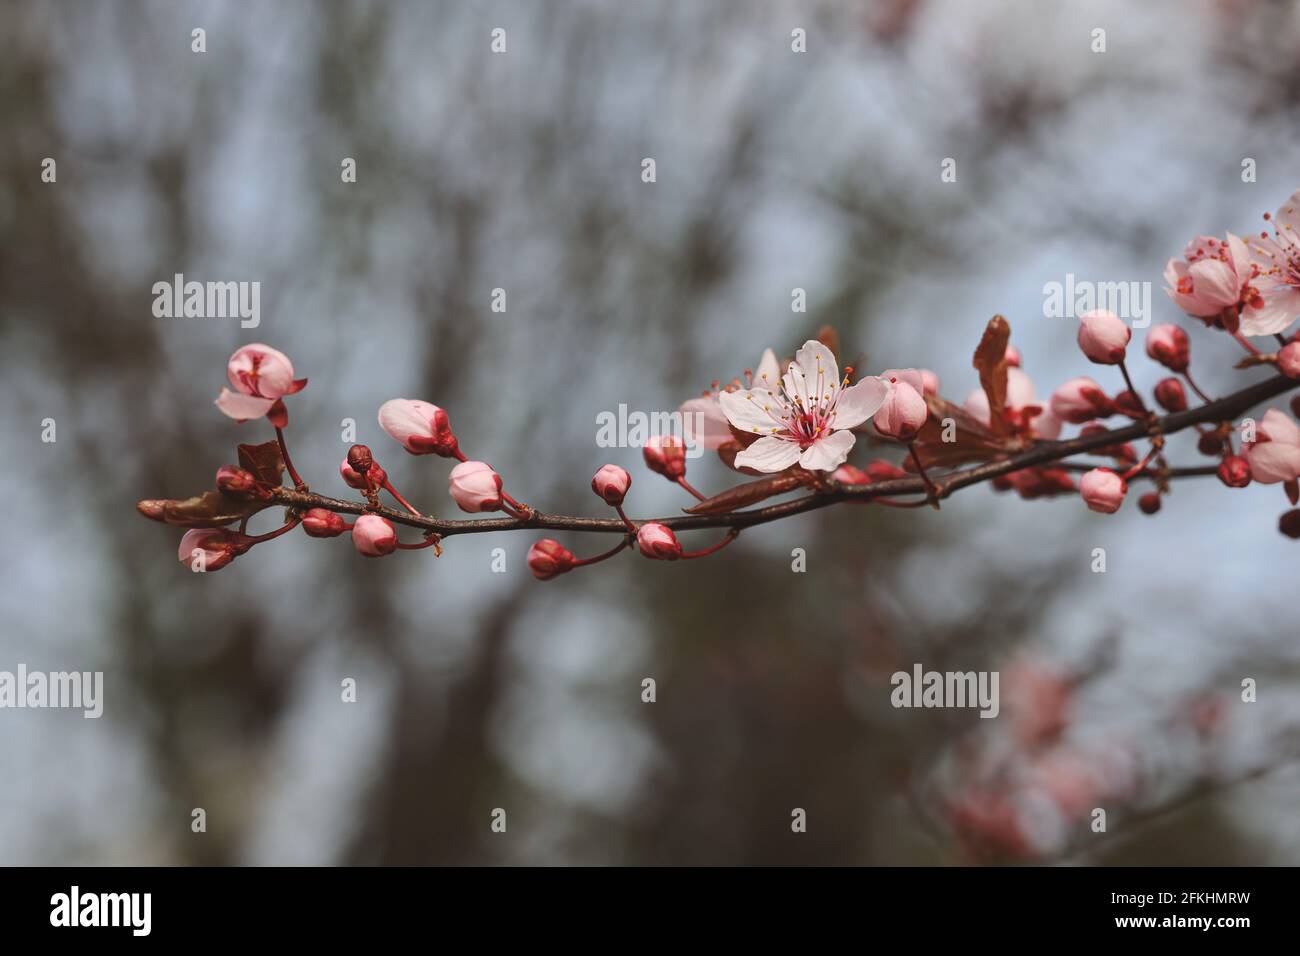 Prunus Cerasifera during Spring in the Garden. Blossom and Buds of Cherry Plum during Springtime. Close-up of Twig with Pink Flowering Tree. Stock Photo